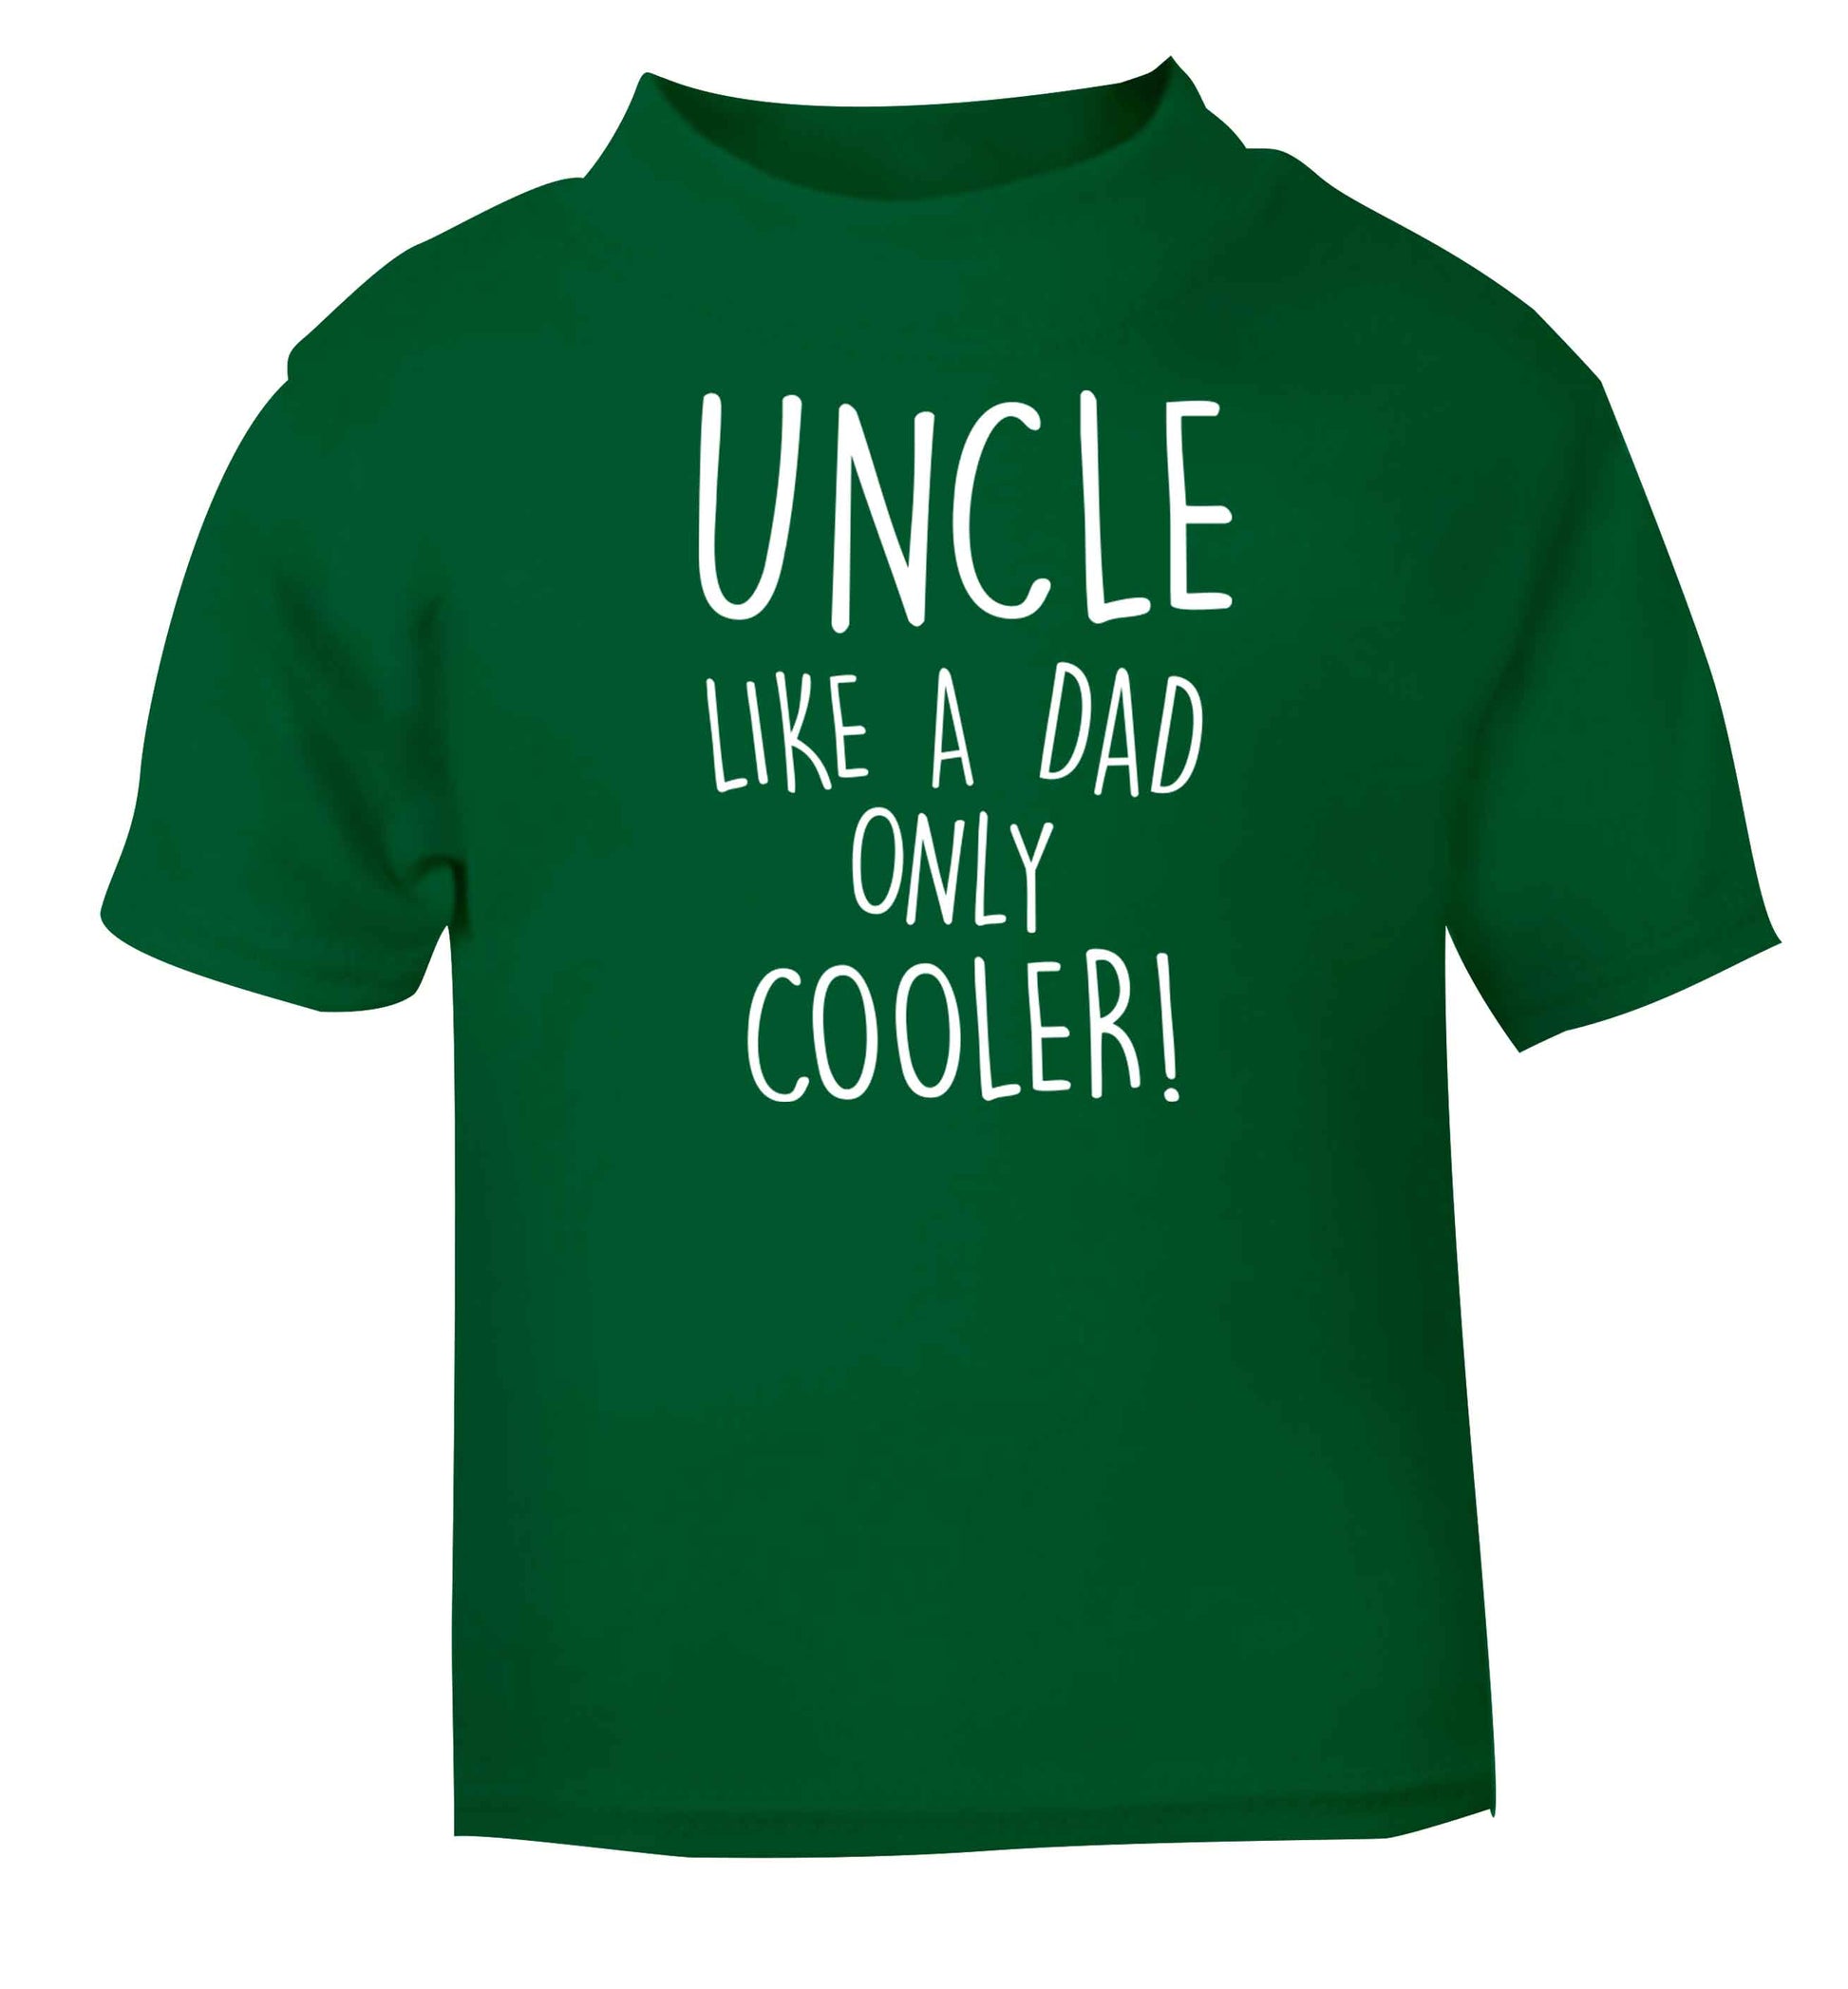 Uncle like a dad only cooler green baby toddler Tshirt 2 Years